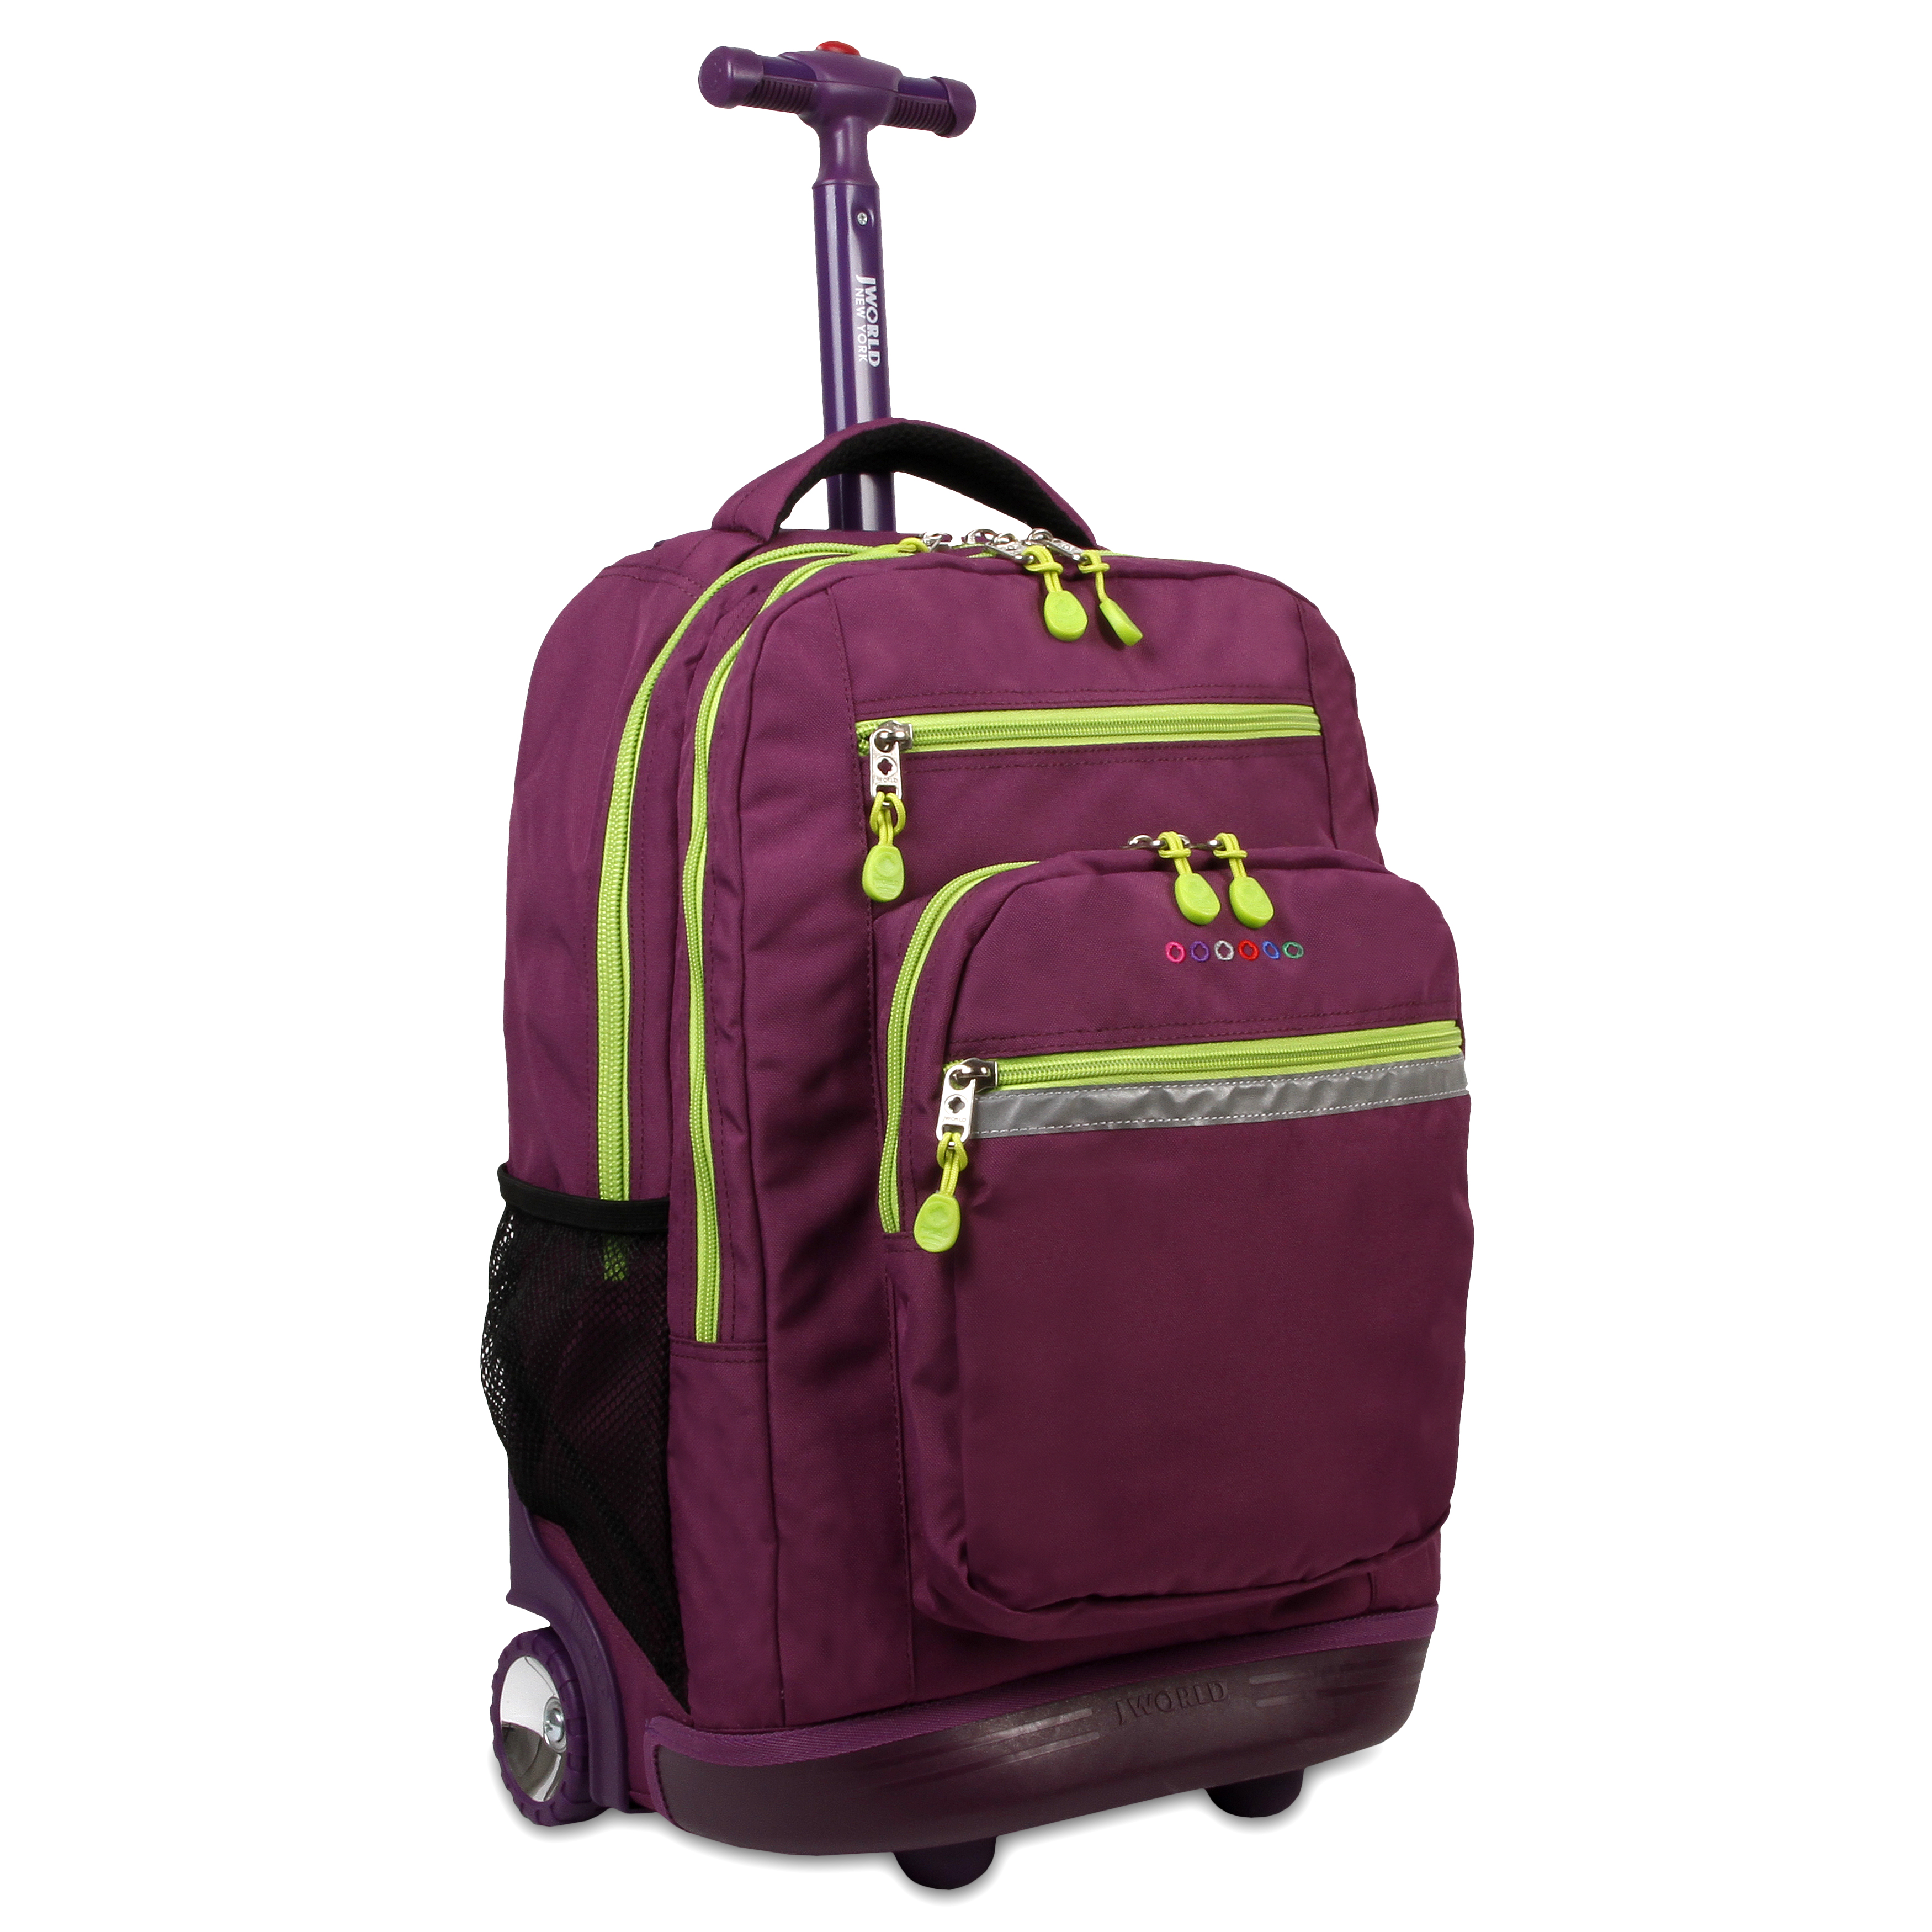 J World Girls Sundance 20" Rolling Backpack With Laptop Sleeve For School And Travel, Purple - image 1 of 9